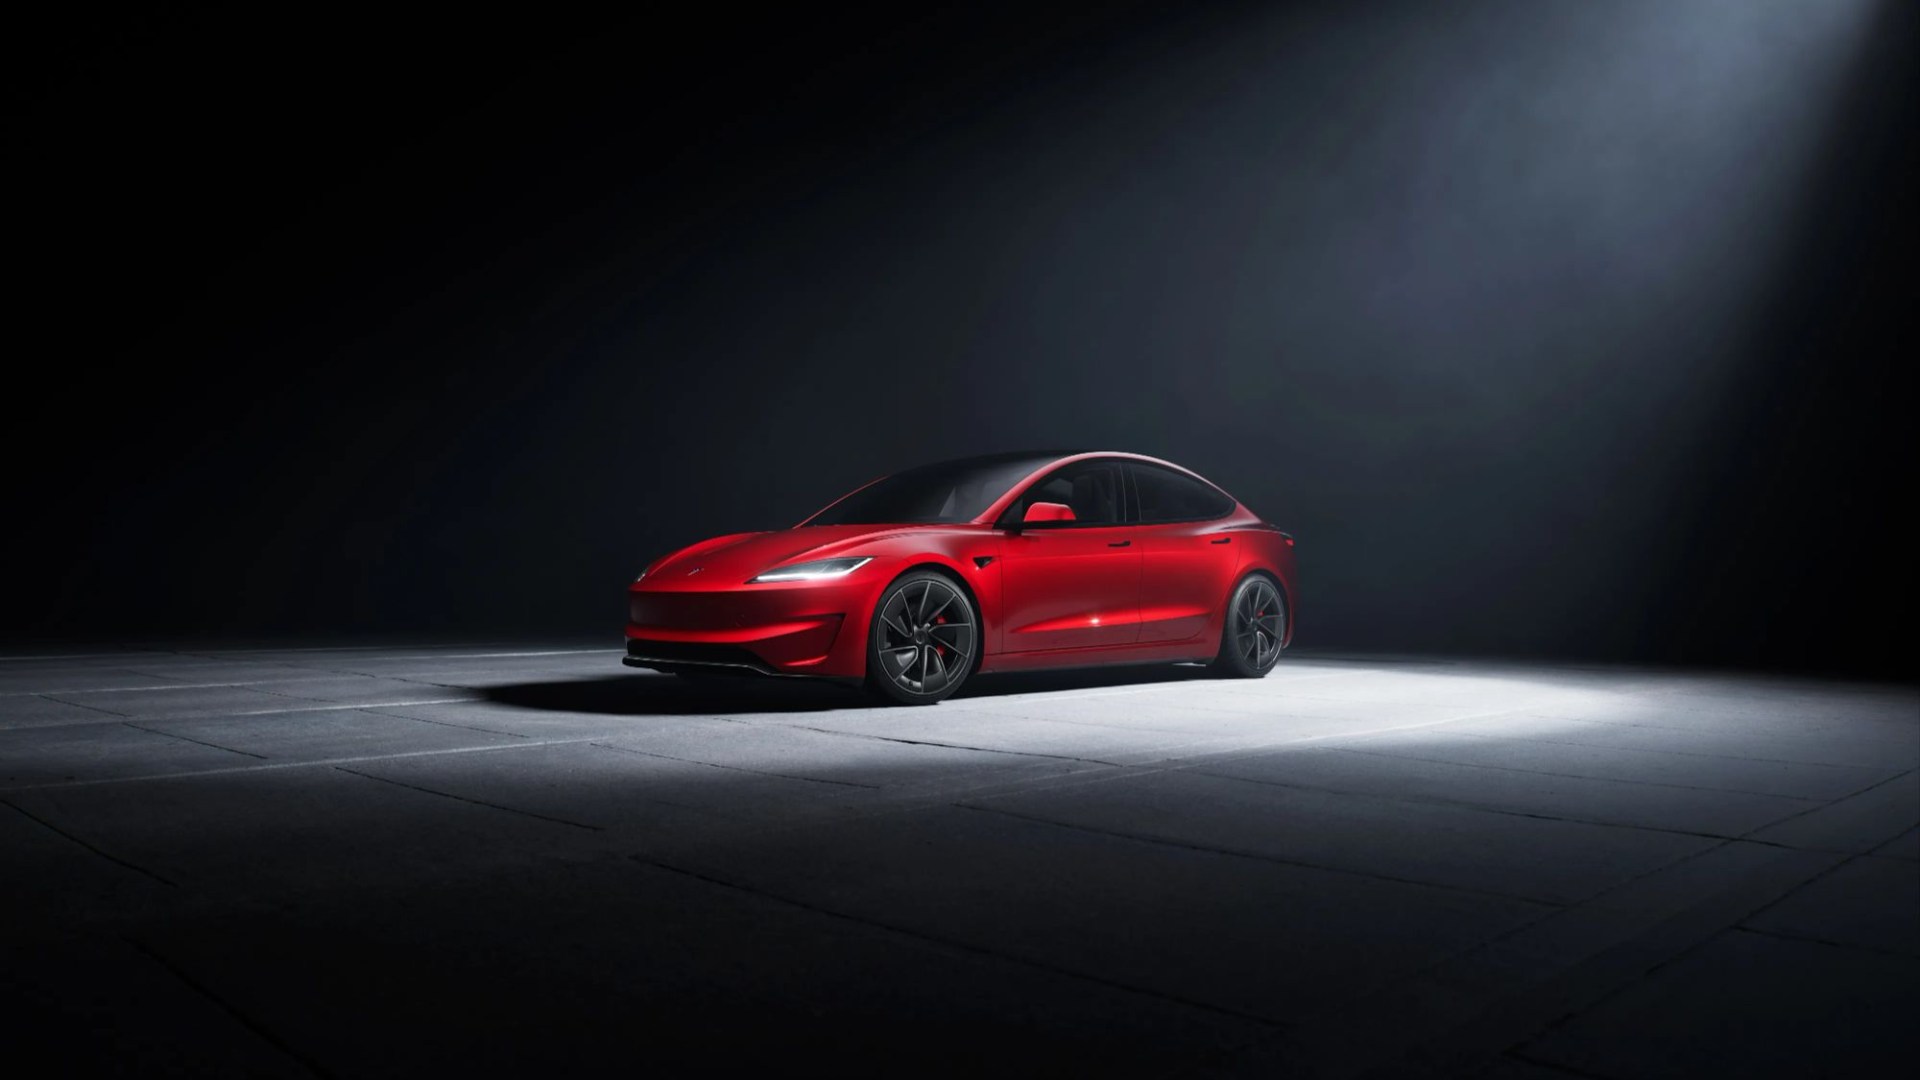 Tesla unveils ‘quicker, more powerful version’ of UK’s second-best selling car reaching 0-60mph in 2.9 seconds